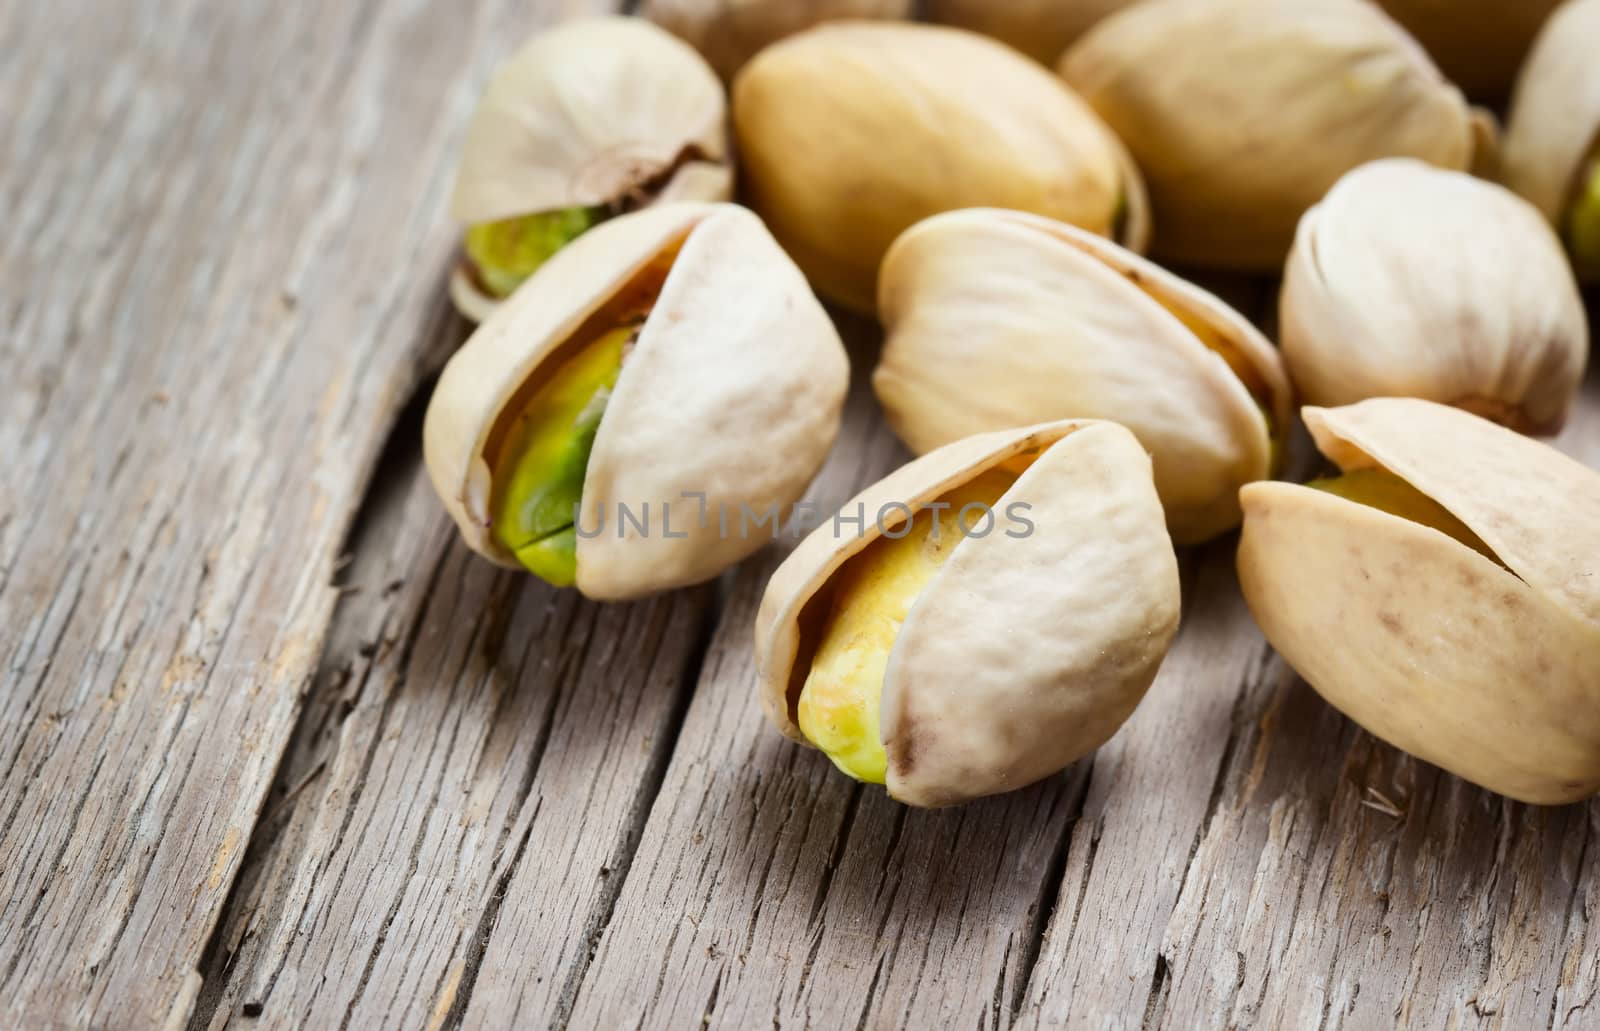 Pistachio nuts on wooden background